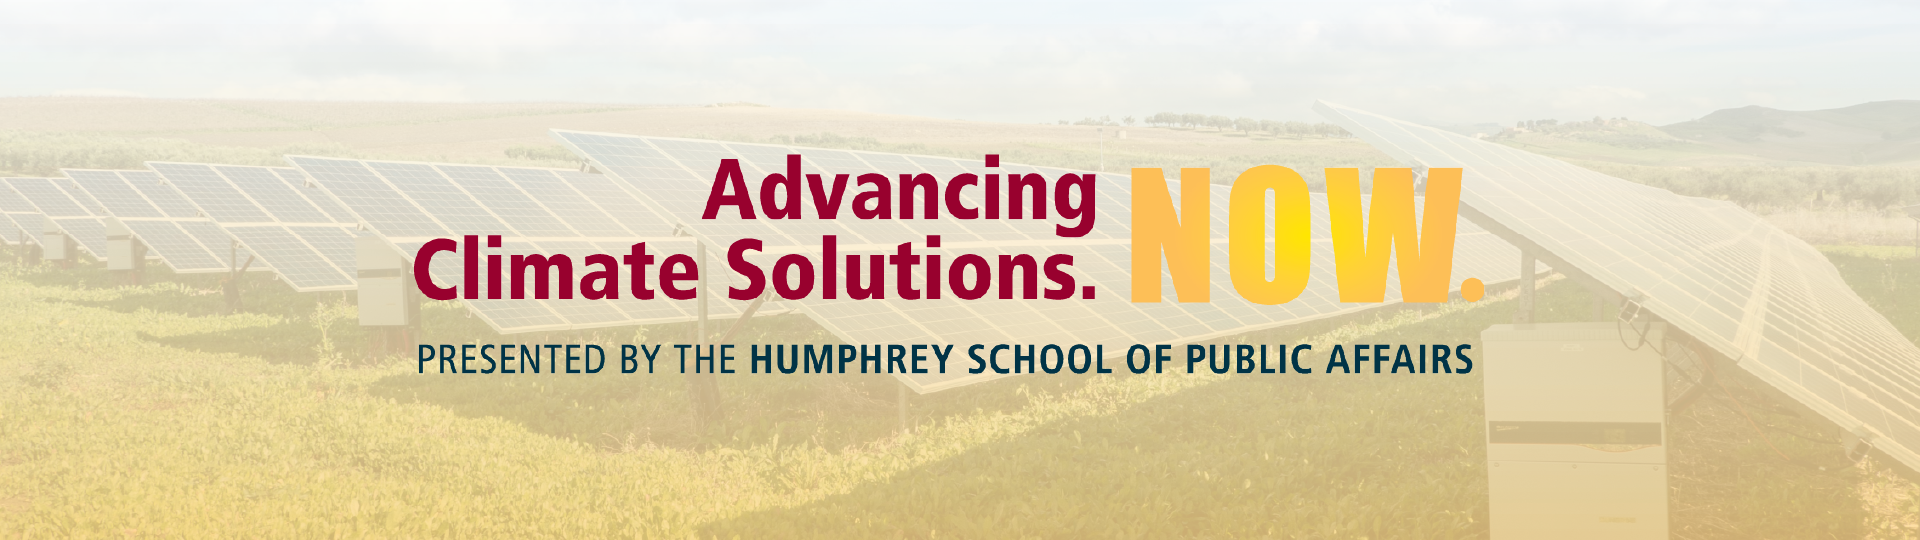 Advancing Climate Solutions. Now. Presented by the Humphrey School of Public Affairs